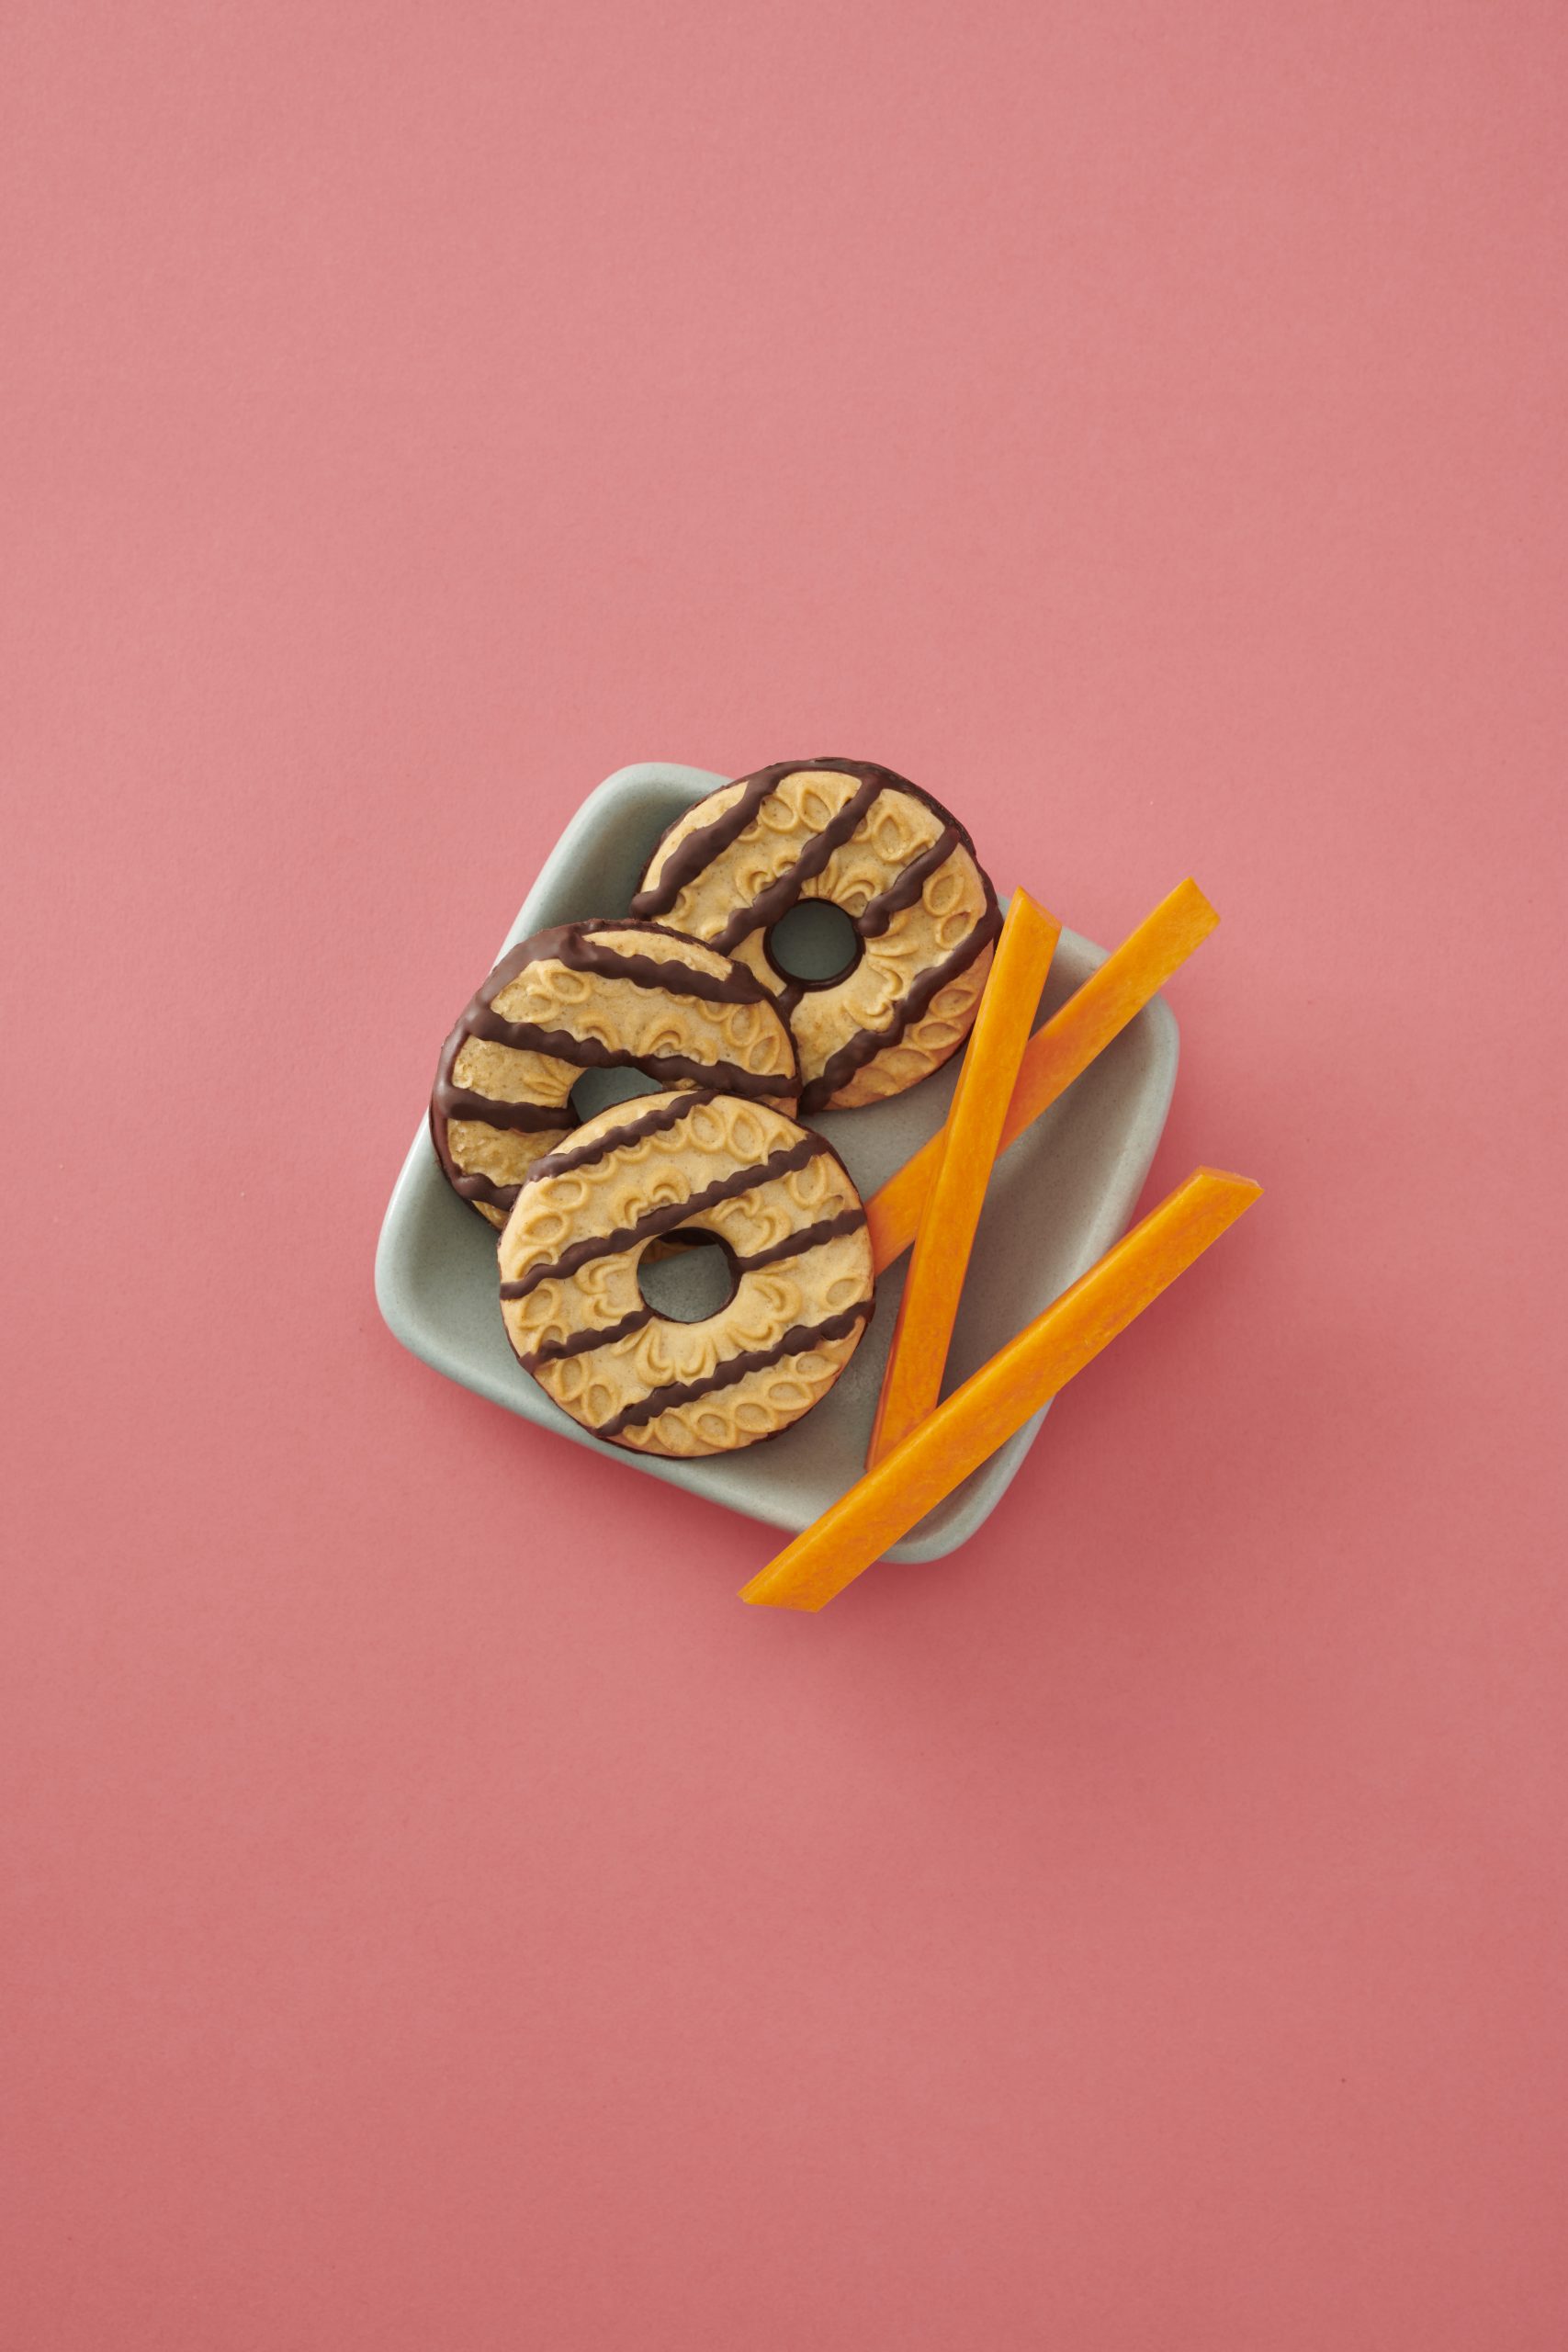 Back to Nature cookies with carrot sticks